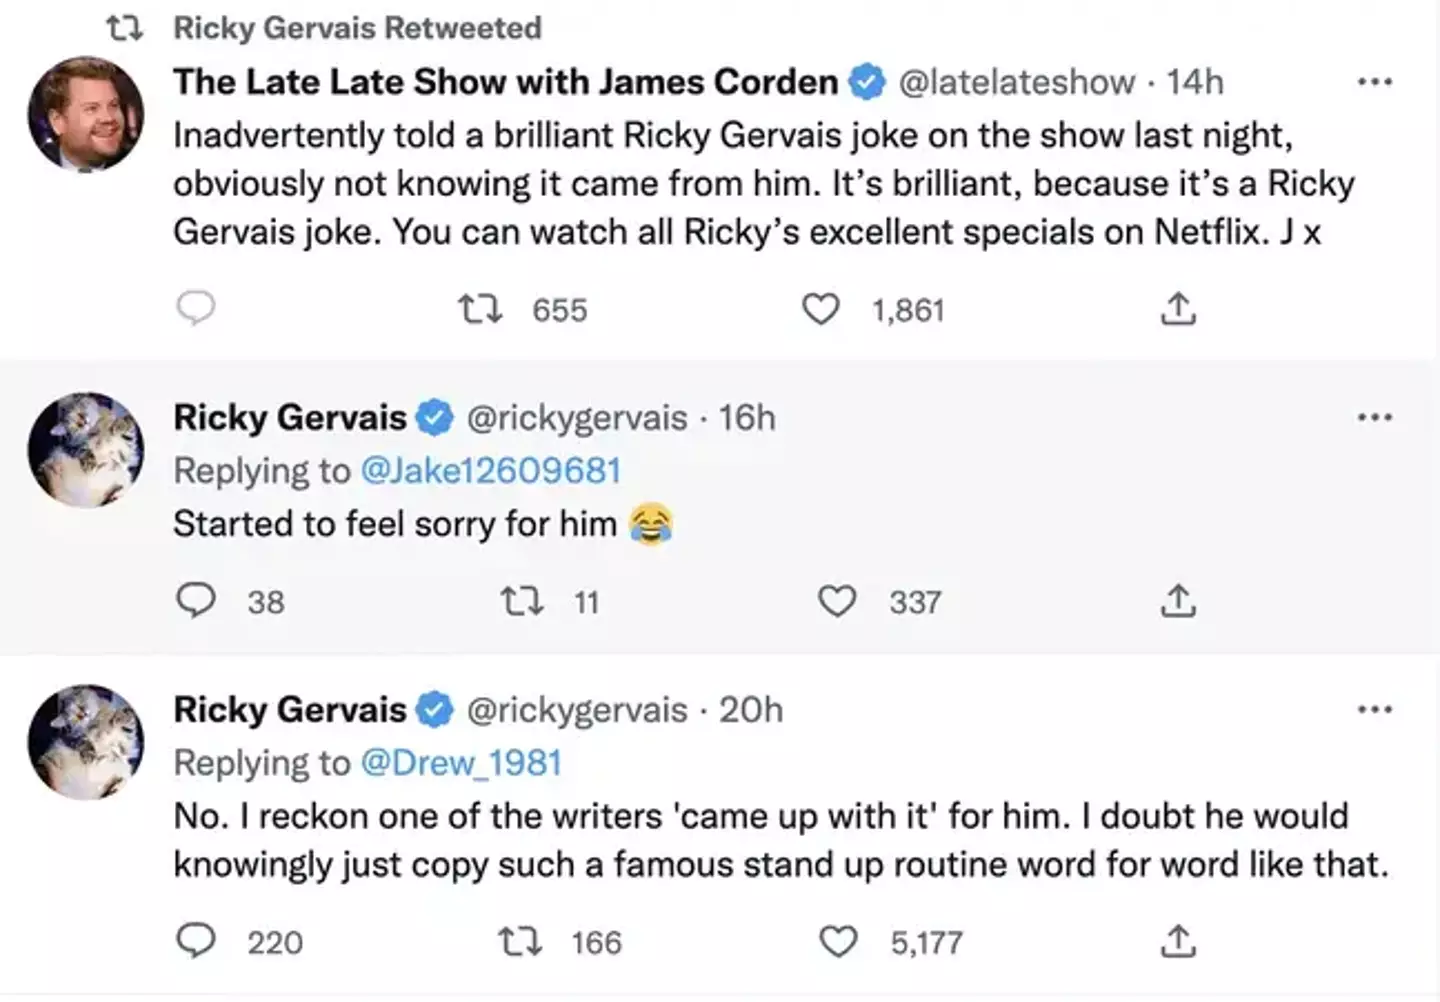 Gervais deleted his initial response because he felt 'sorry' for Corden.